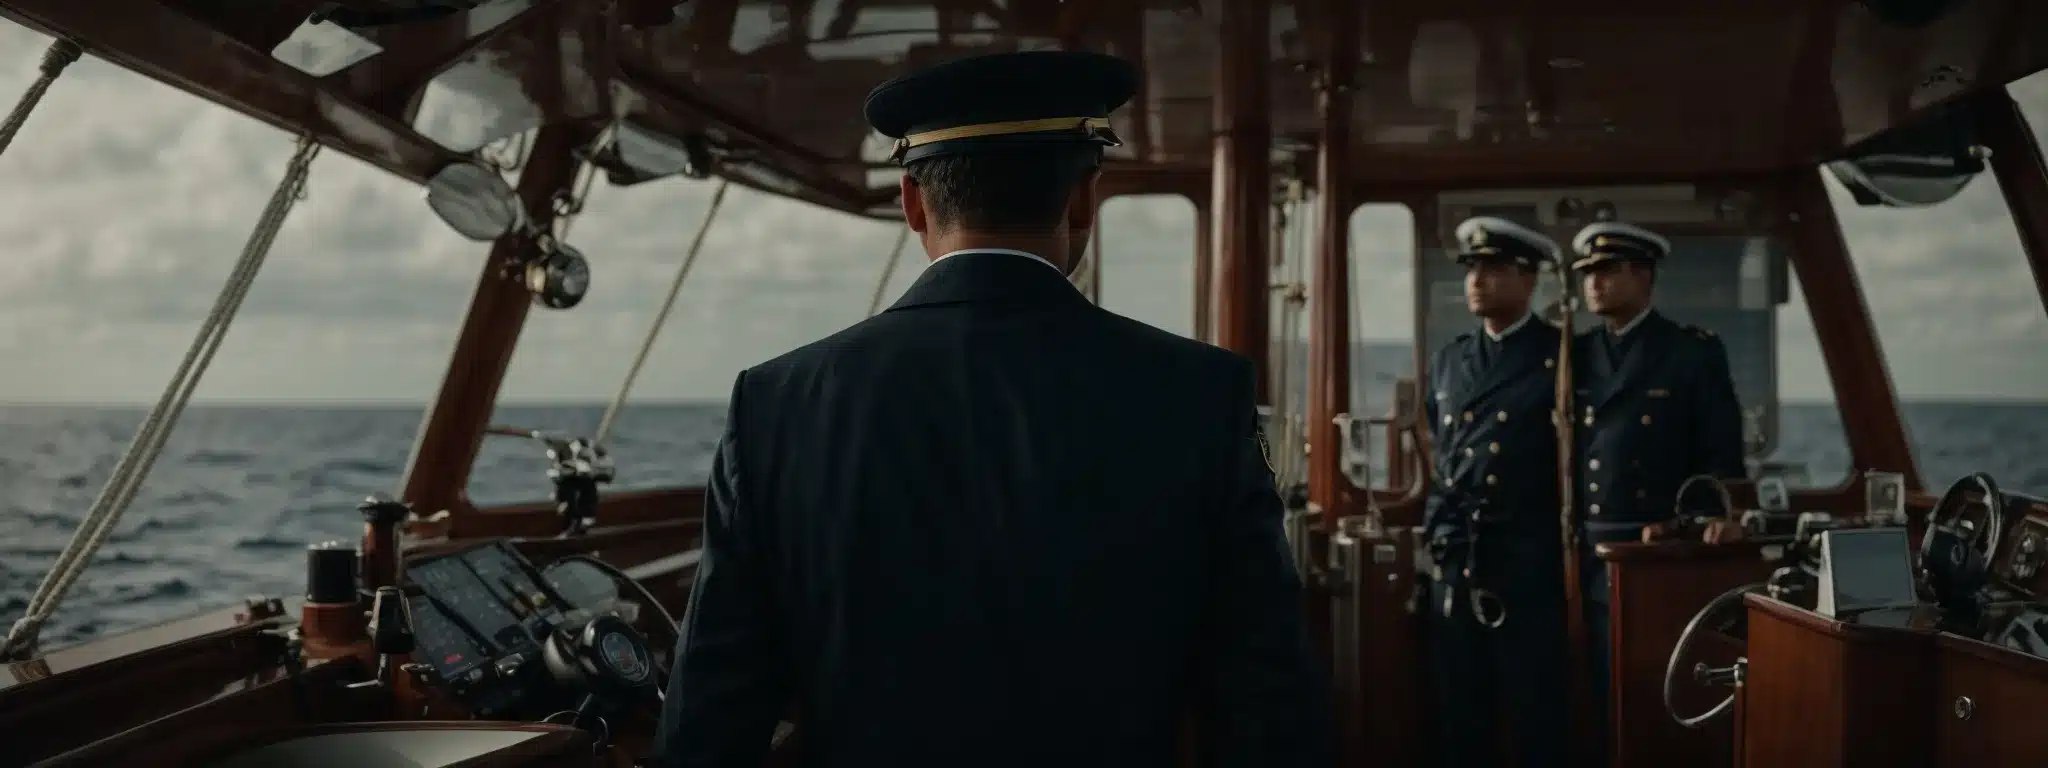 A Captain Stands At The Helm Of A Ship, Eyes Set On The Horizon With Sophisticated Navigational Instruments Guiding The Way.